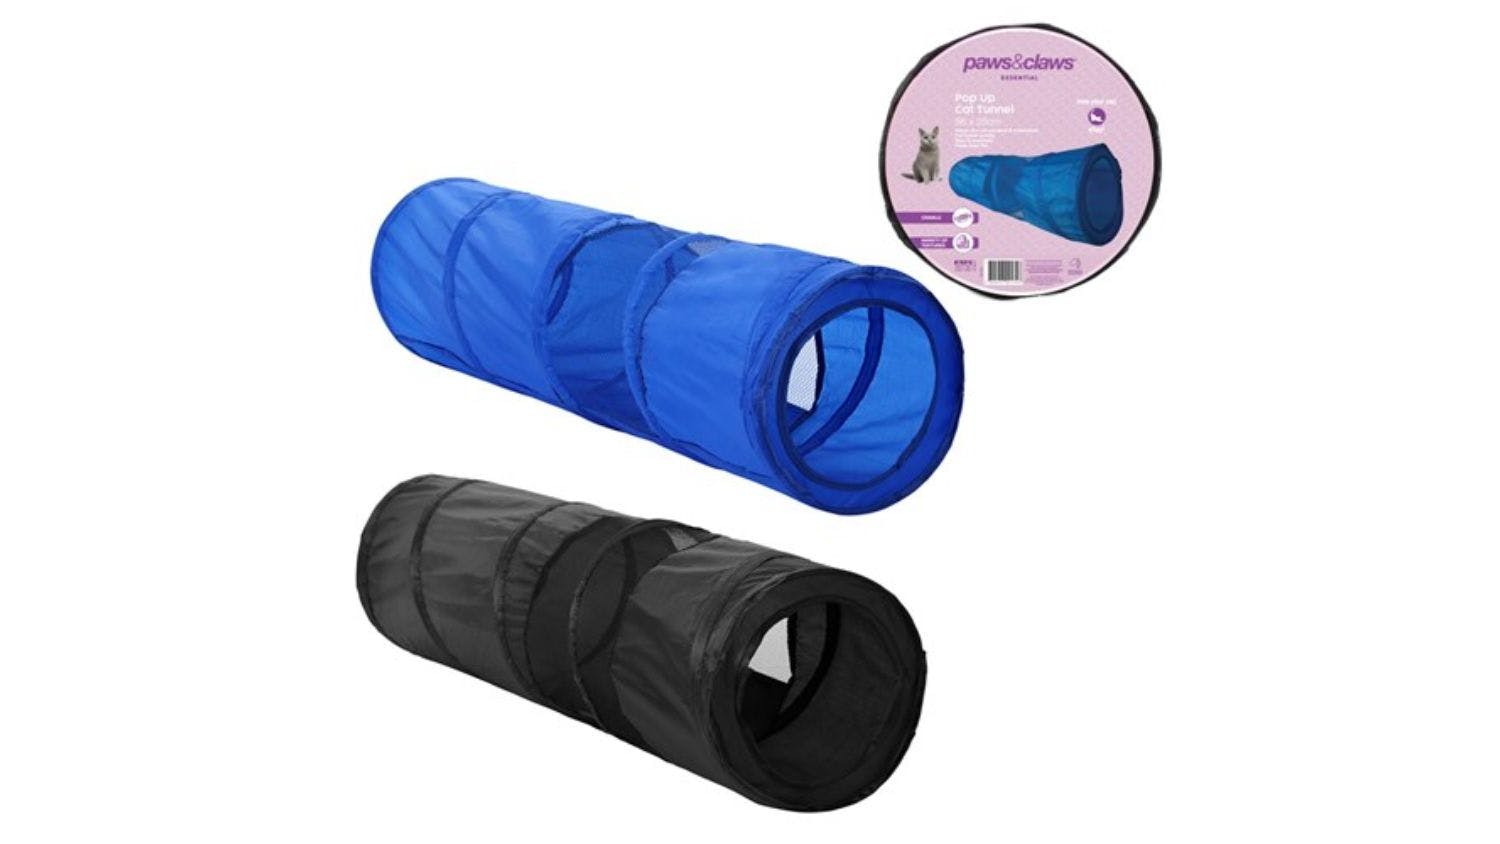 Collapsible Cat Tunnel Blue 86 X 26.5cm